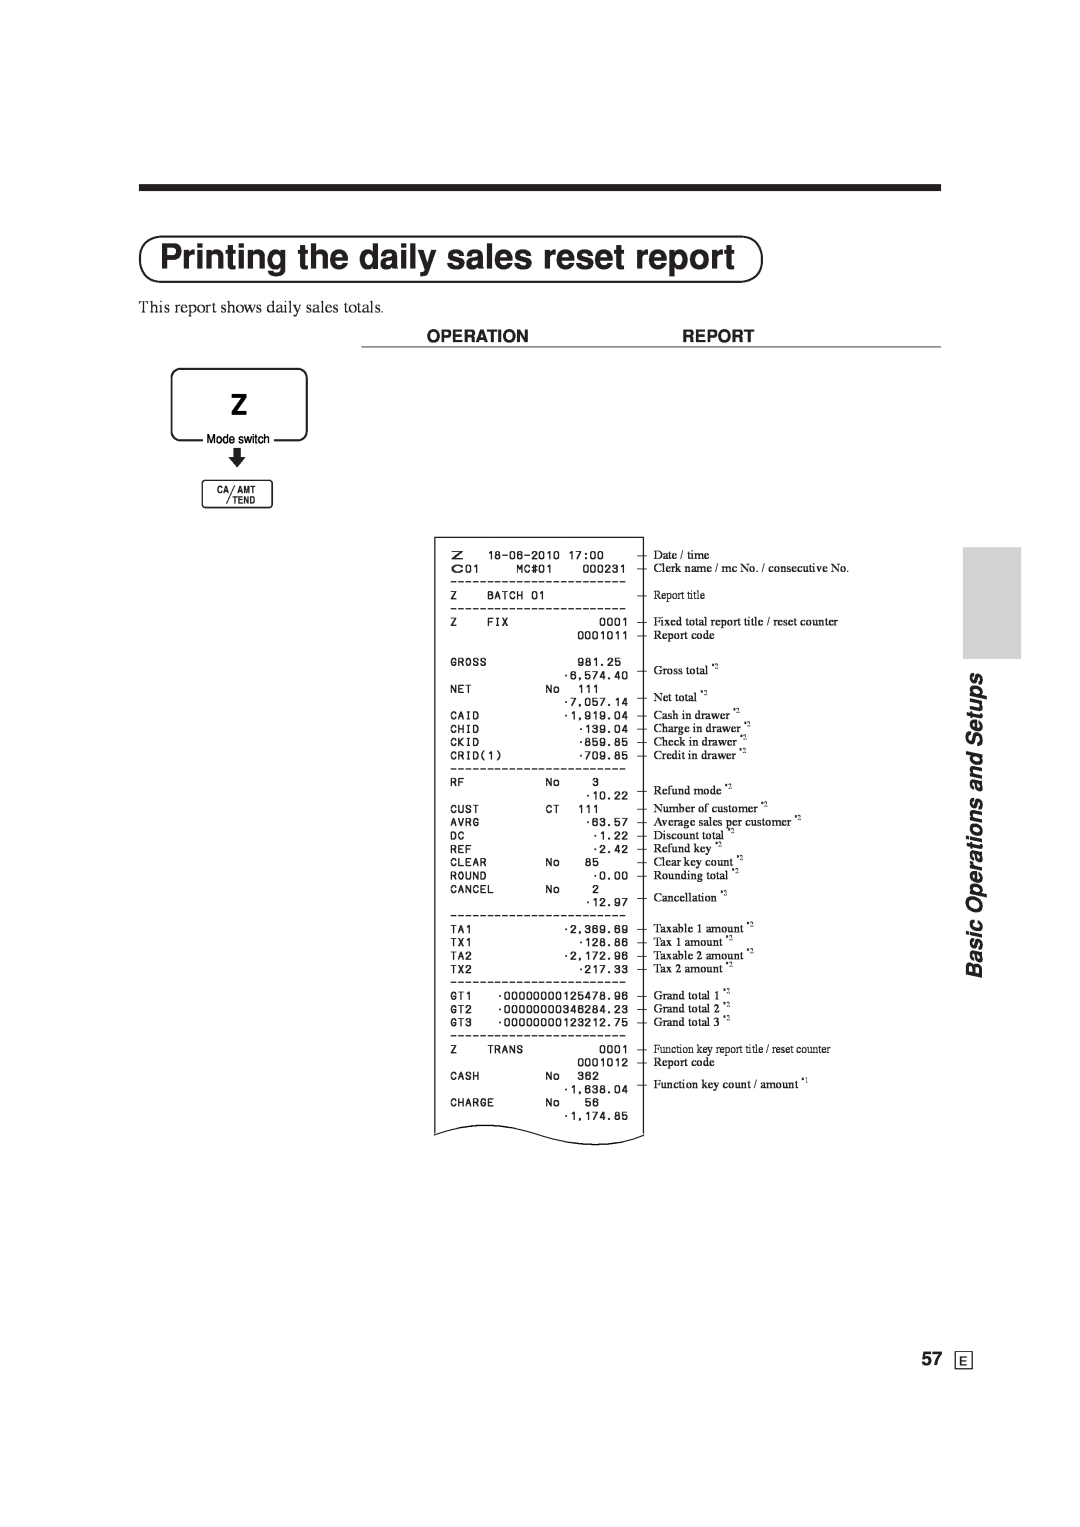 Casio SE-C6000, SE-S6000 user manual Printing the daily sales reset report, 57 E, Basic Operations and Setups 